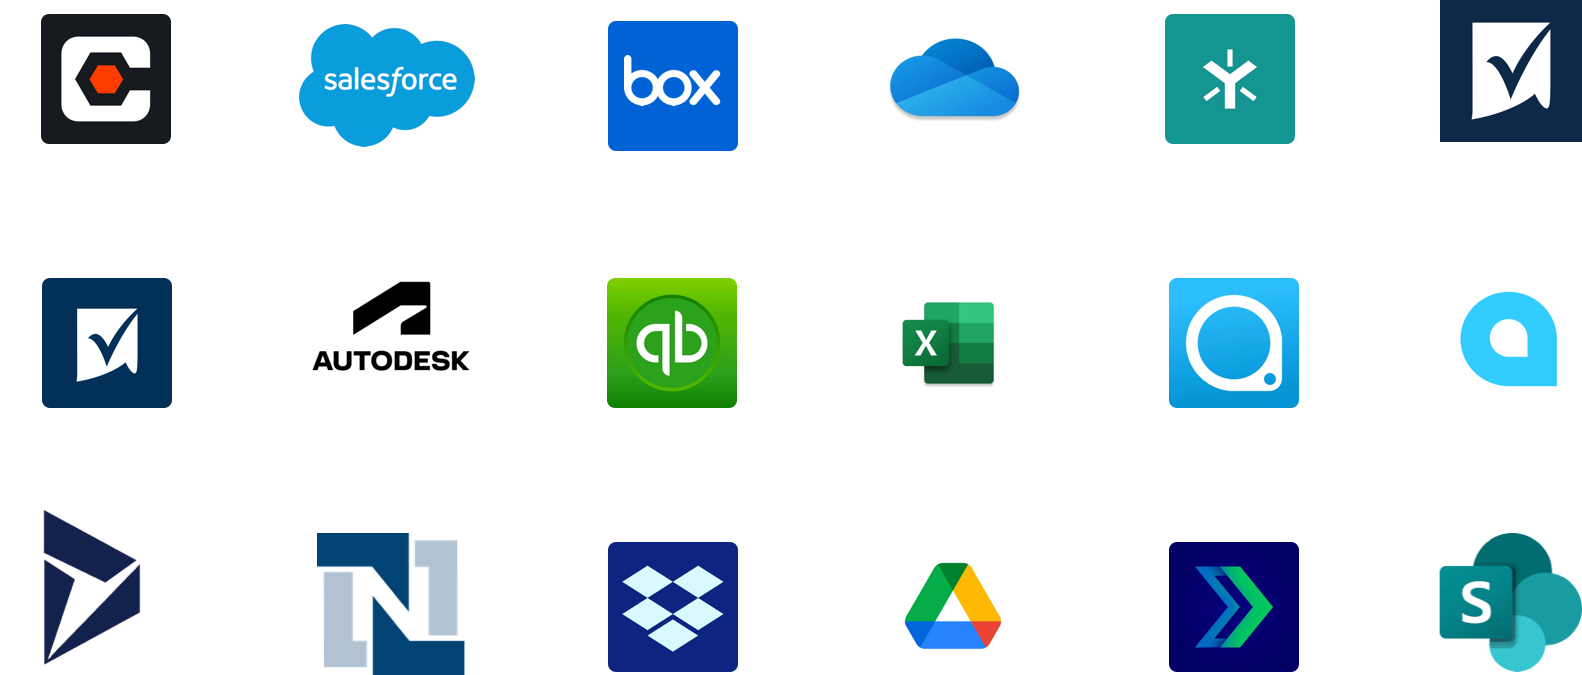 A grid of images showing the different applications GoFormz integrates with. Logos include Procore, Box, Salesforce, and several others.